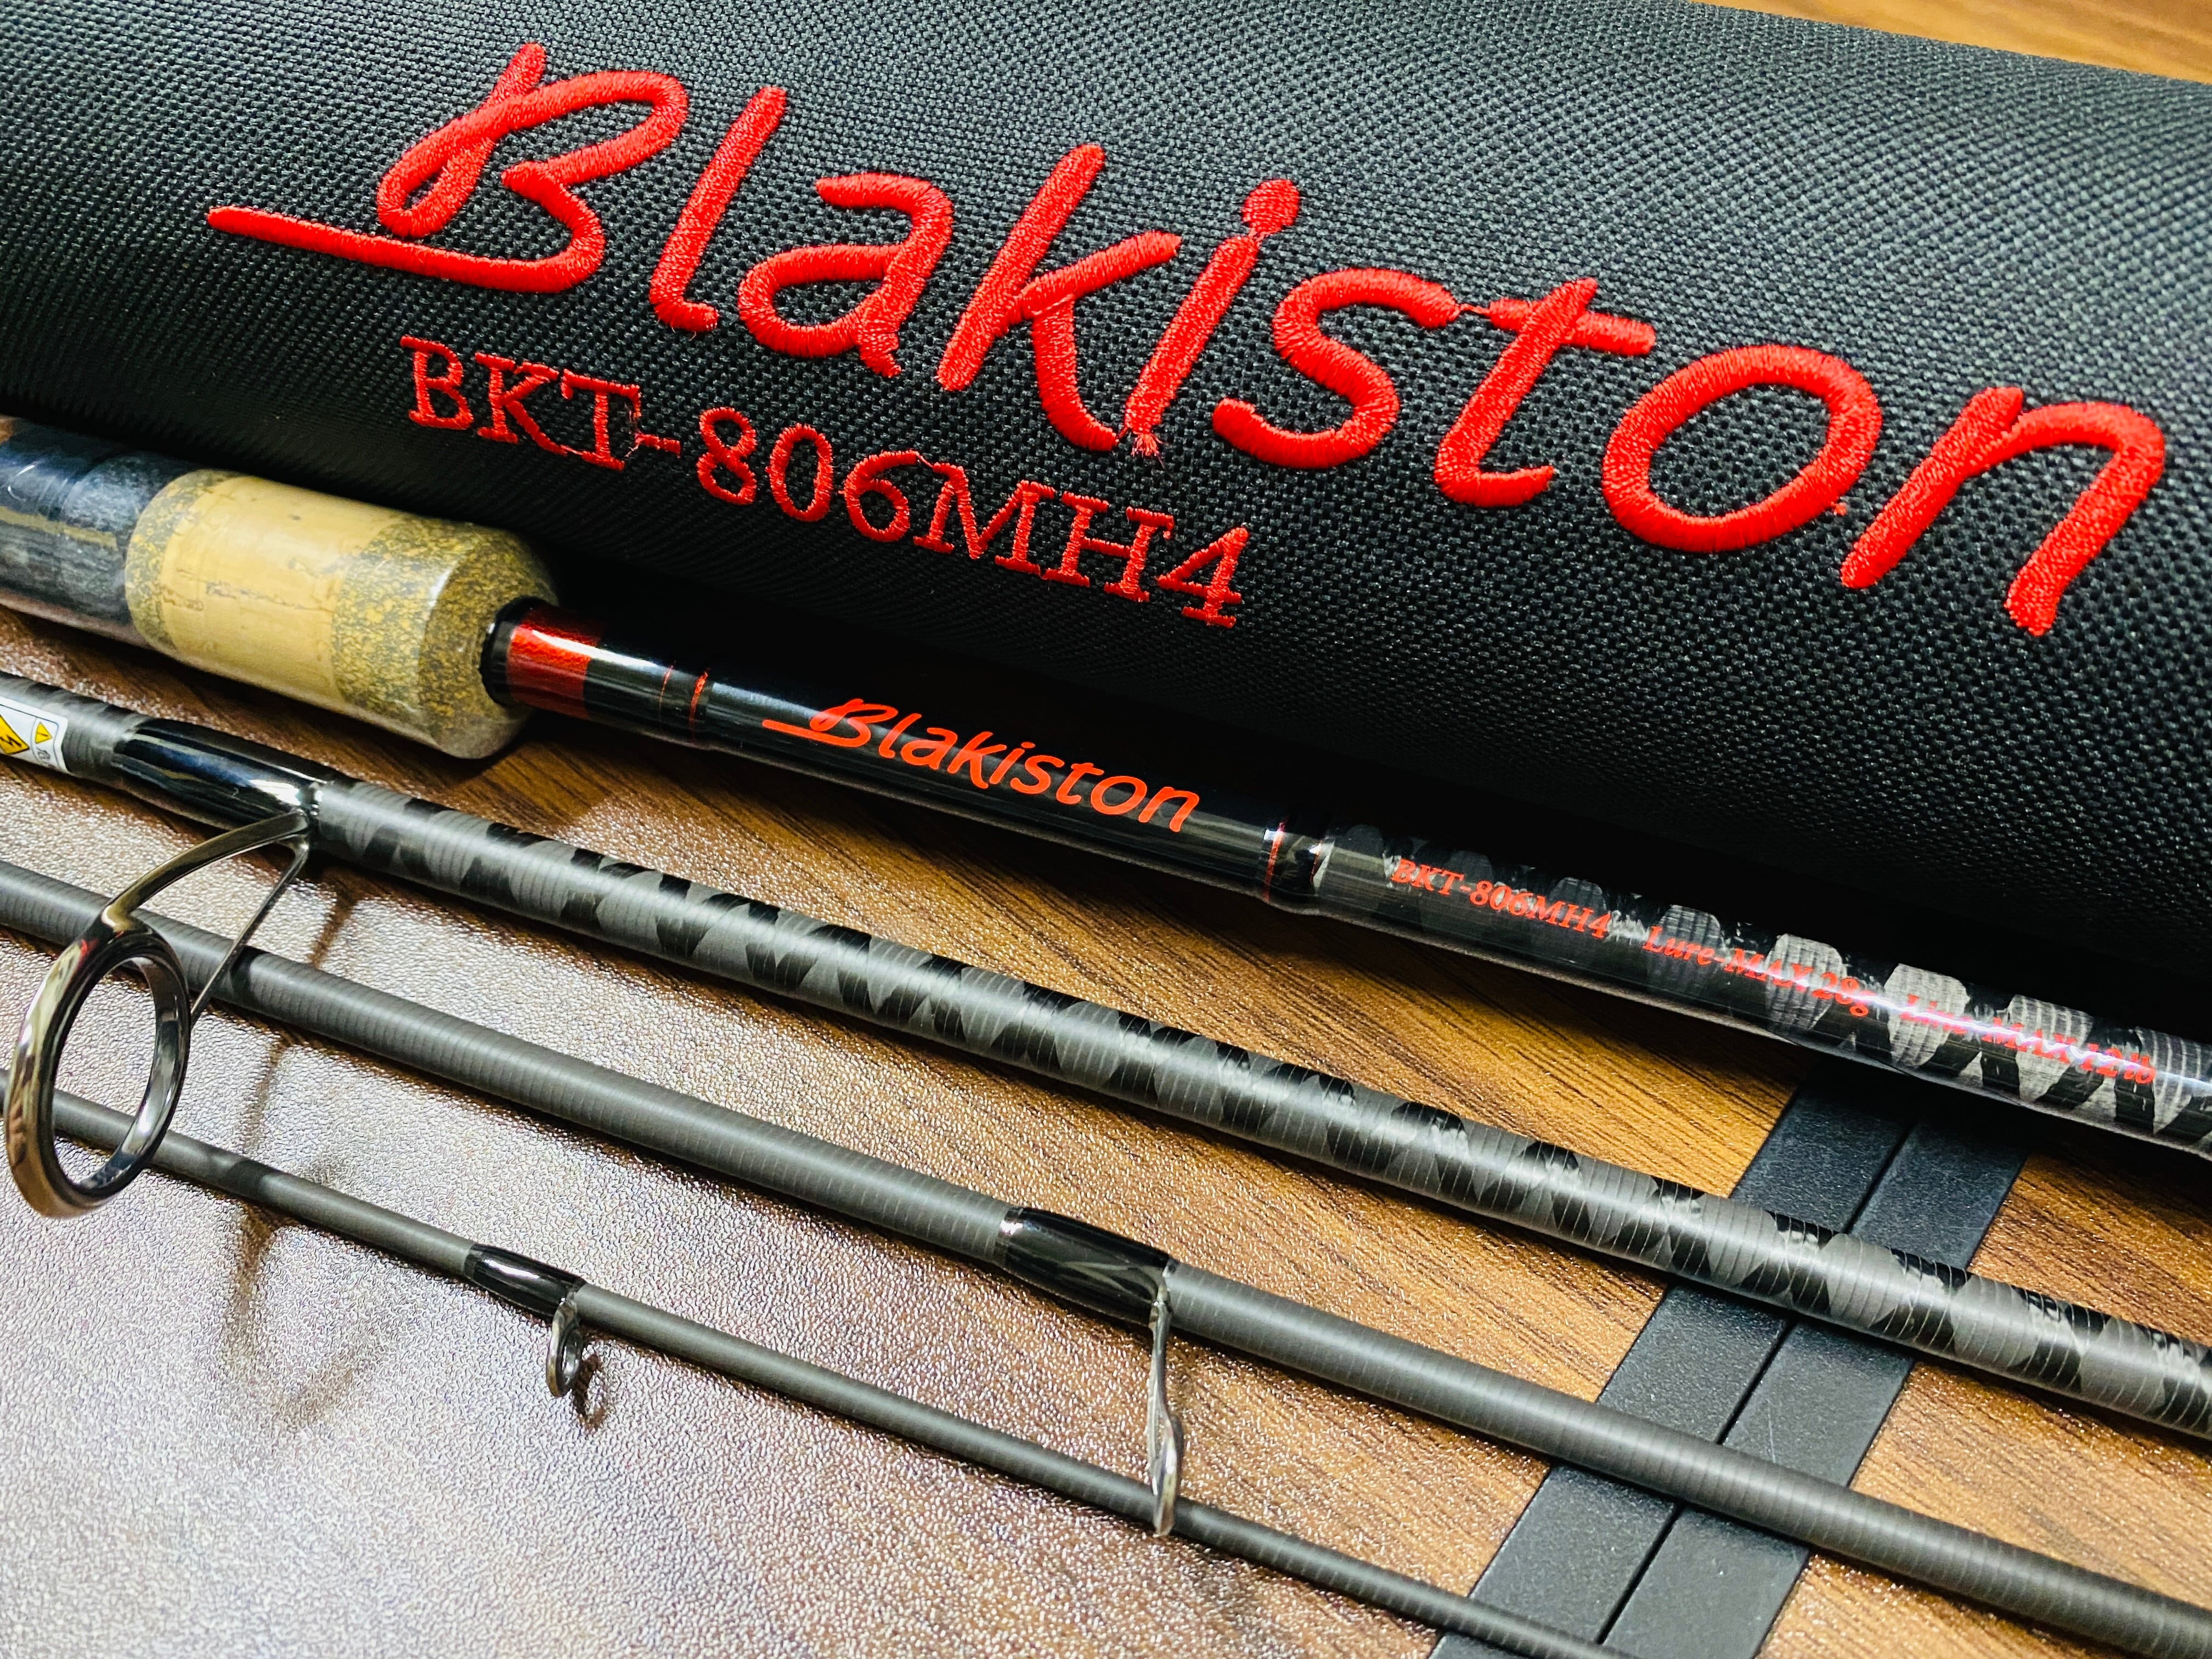 D-3 Custom Lure's Blakiston ブラキストン BKT-806MH-4 | Fishing Tackle BLUE MARLIN  powered by BASE